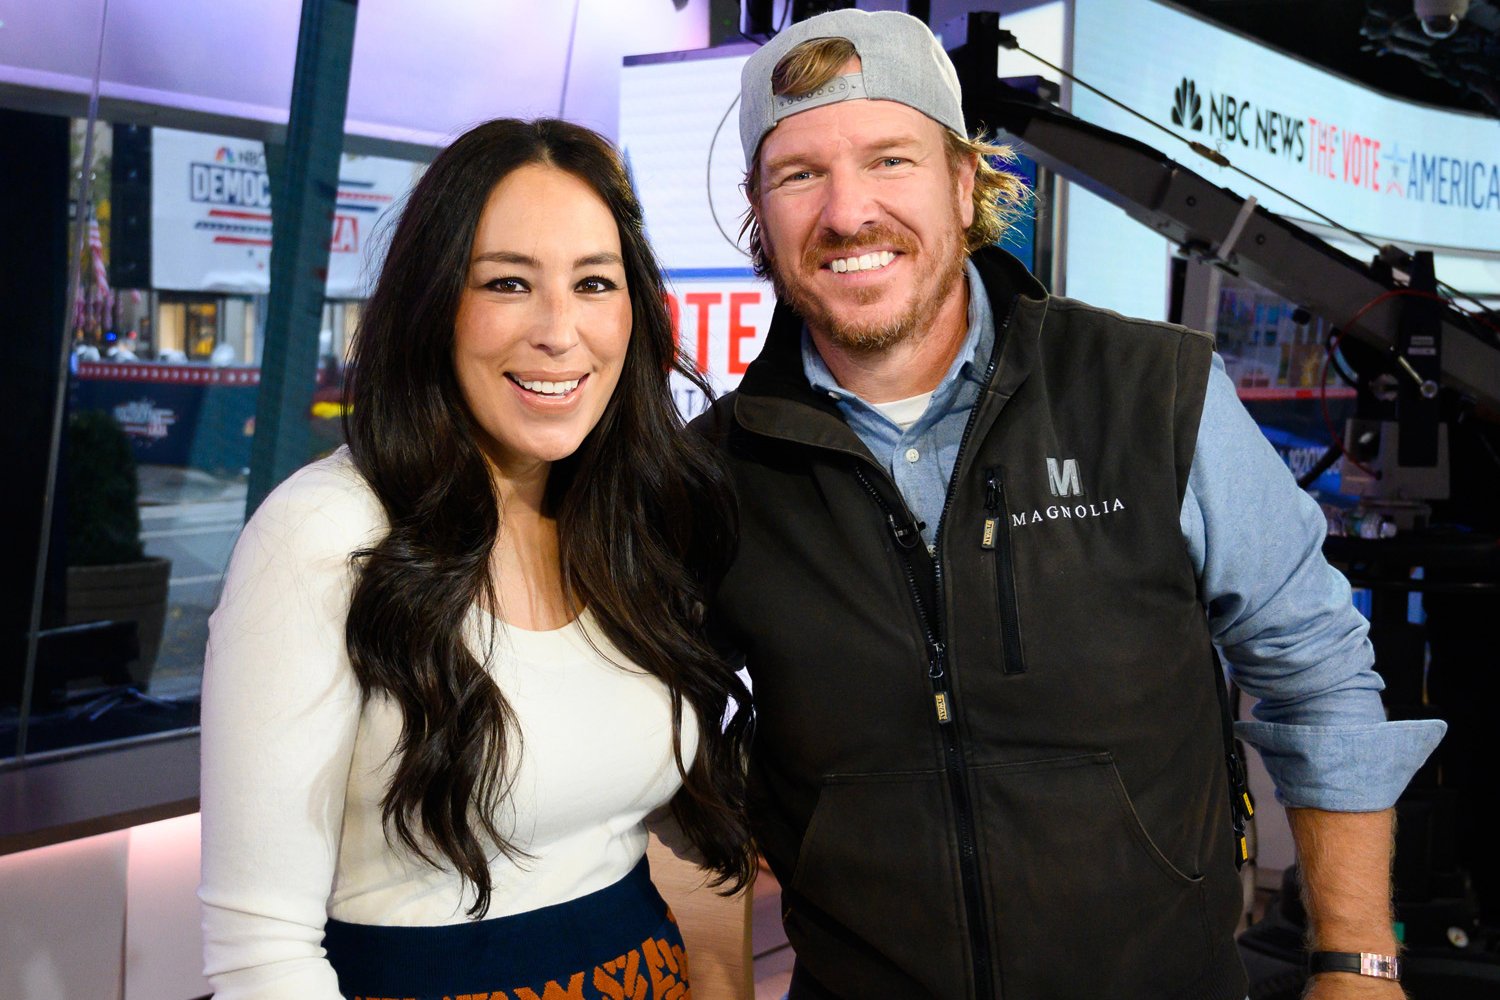 Joanna and Chip Gaines smile as they pose together